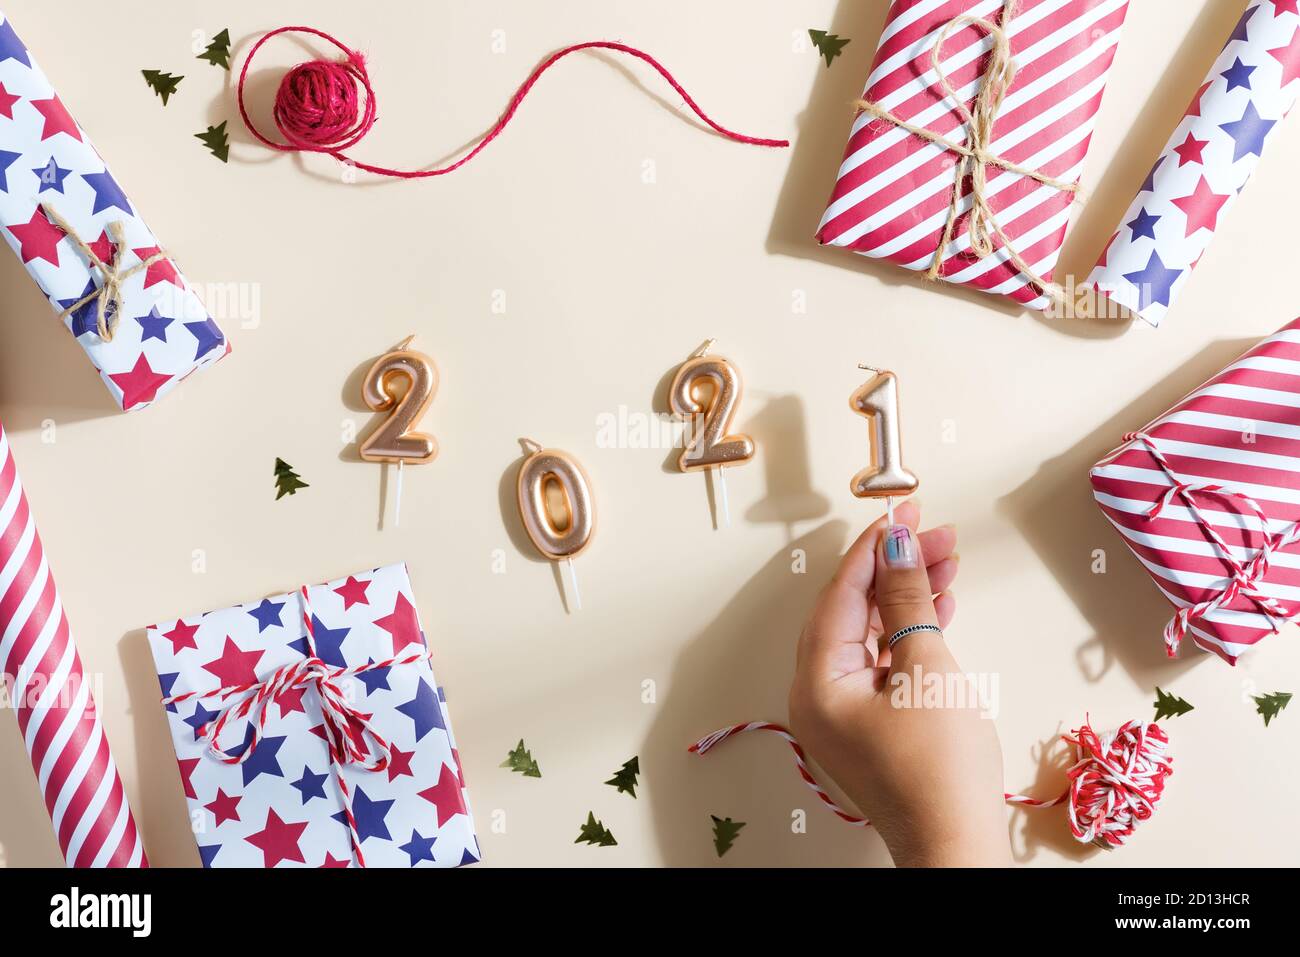 New Year background with gifts and candles figures 2021. Stock Photo